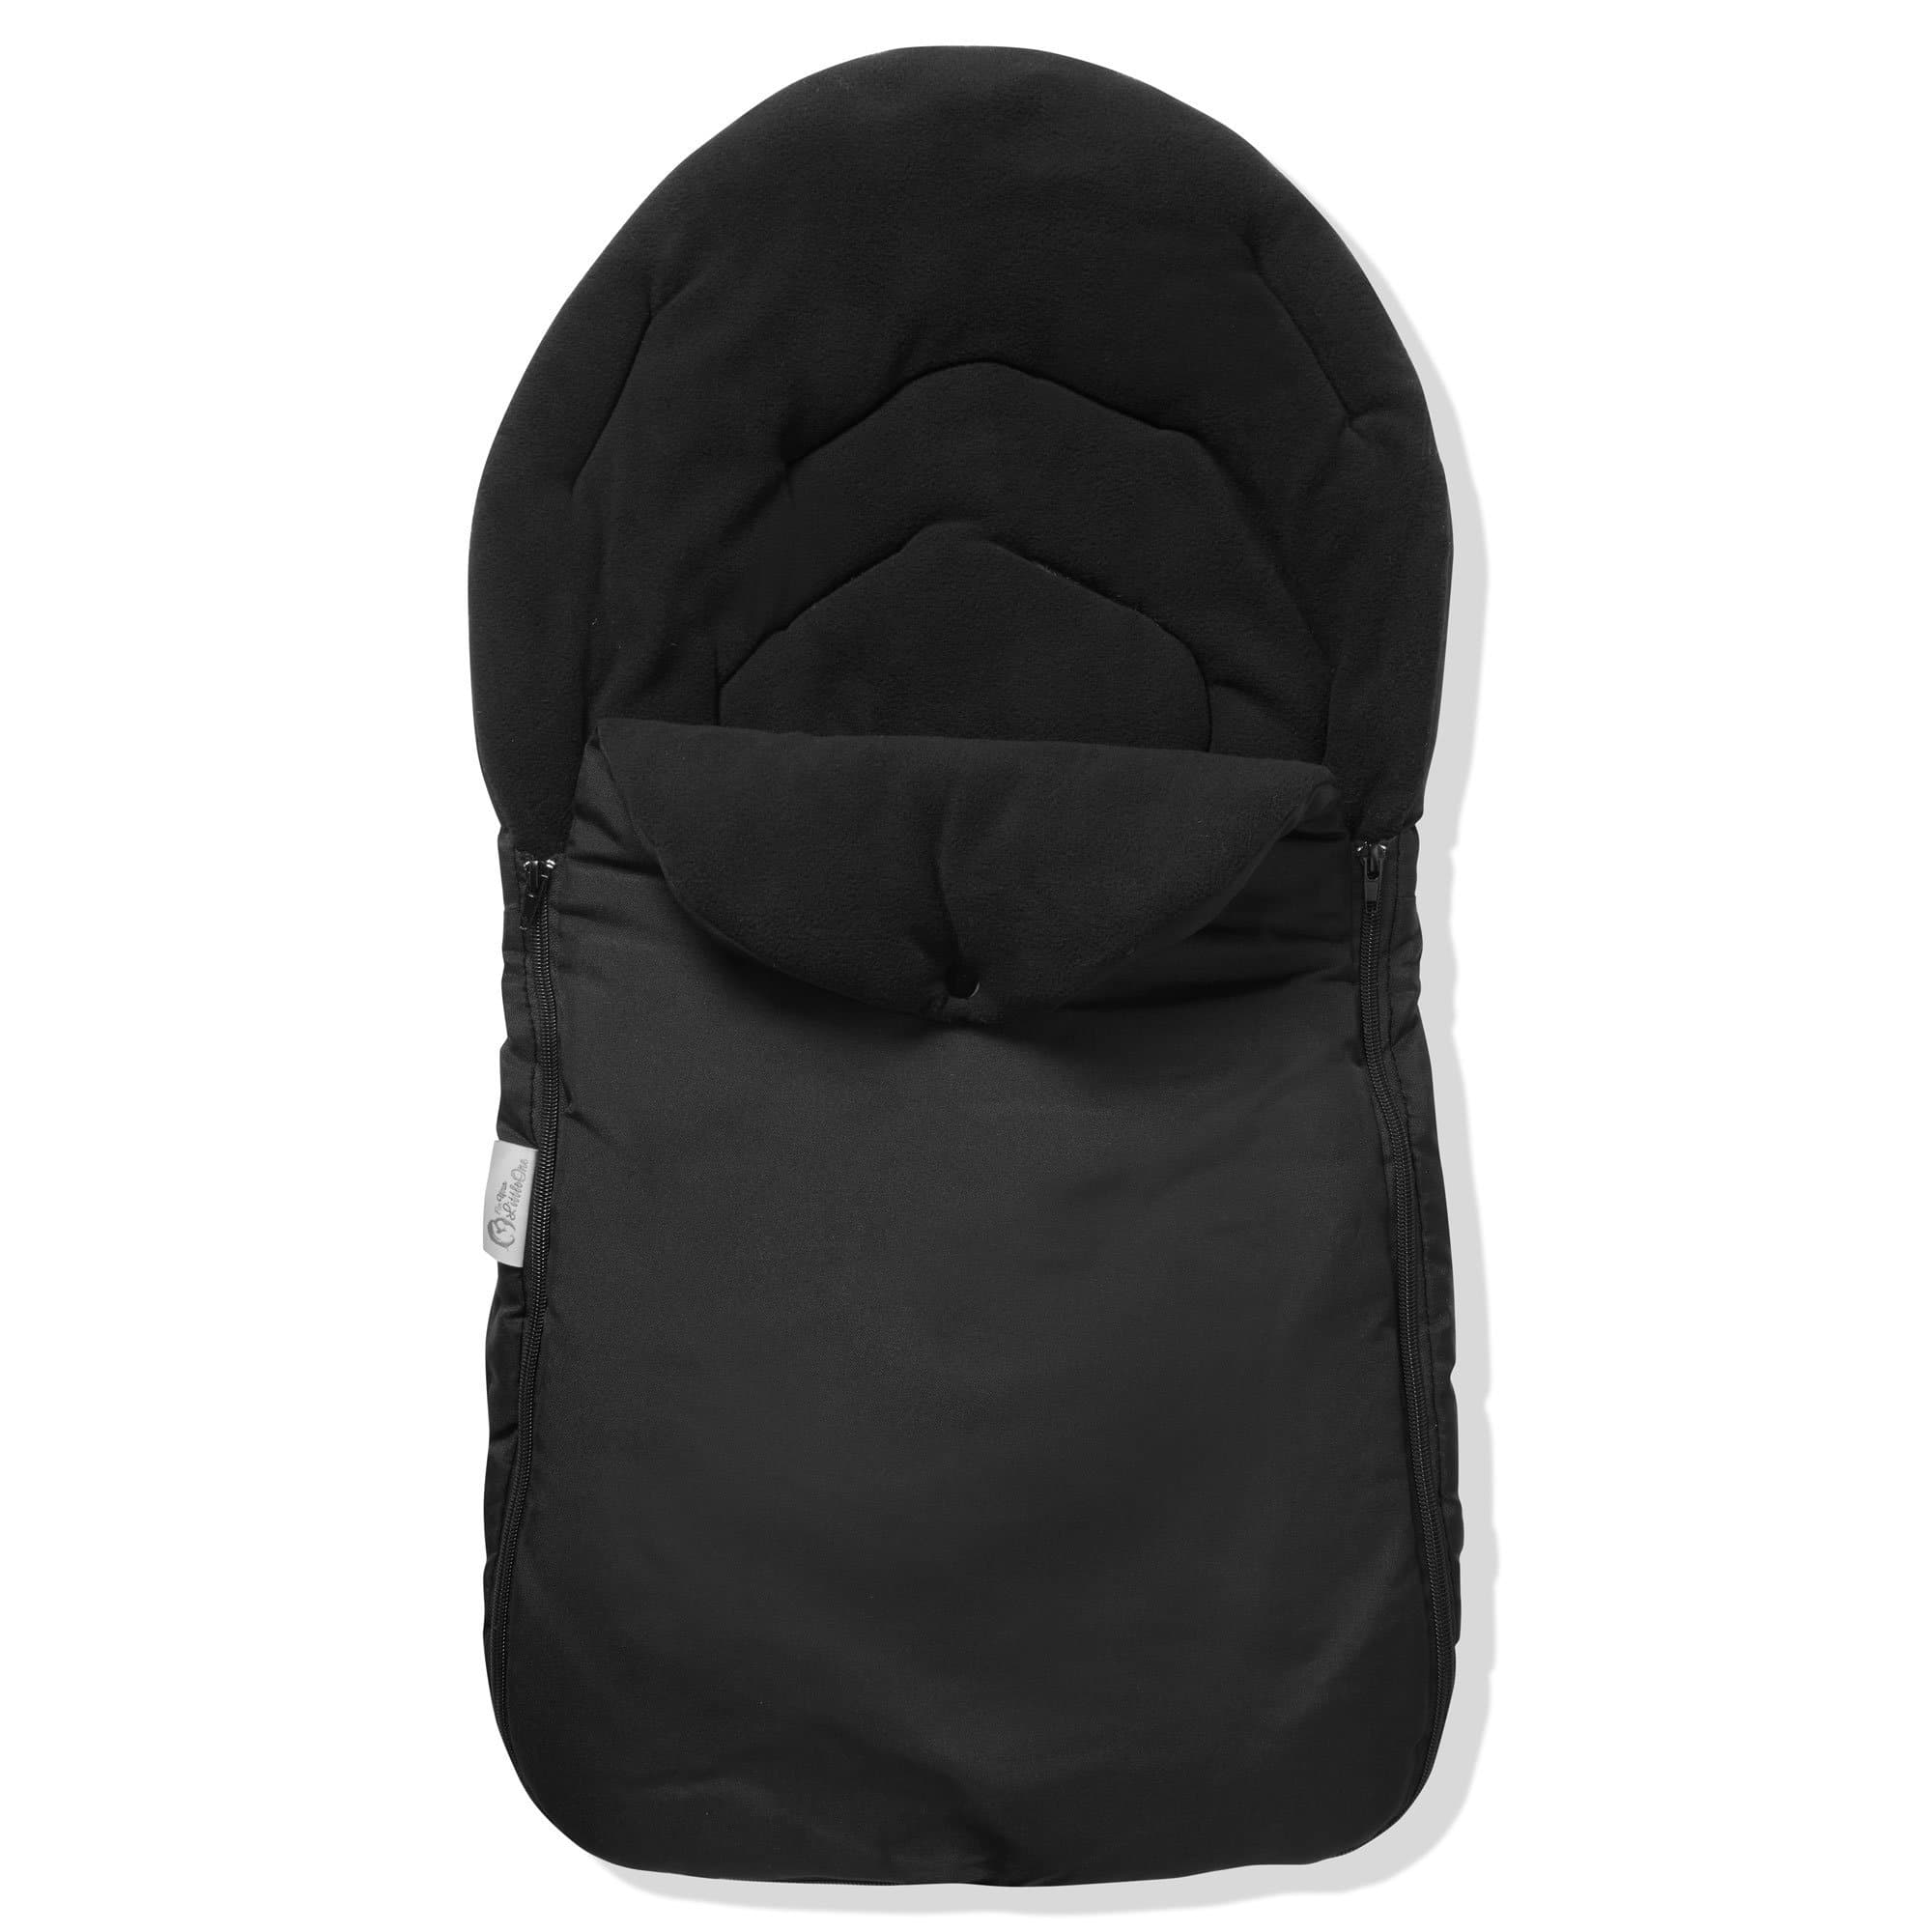 Car Seat Footmuff / Cosy Toes Compatible with Mutsy - Black / Fits All Models | For Your Little One